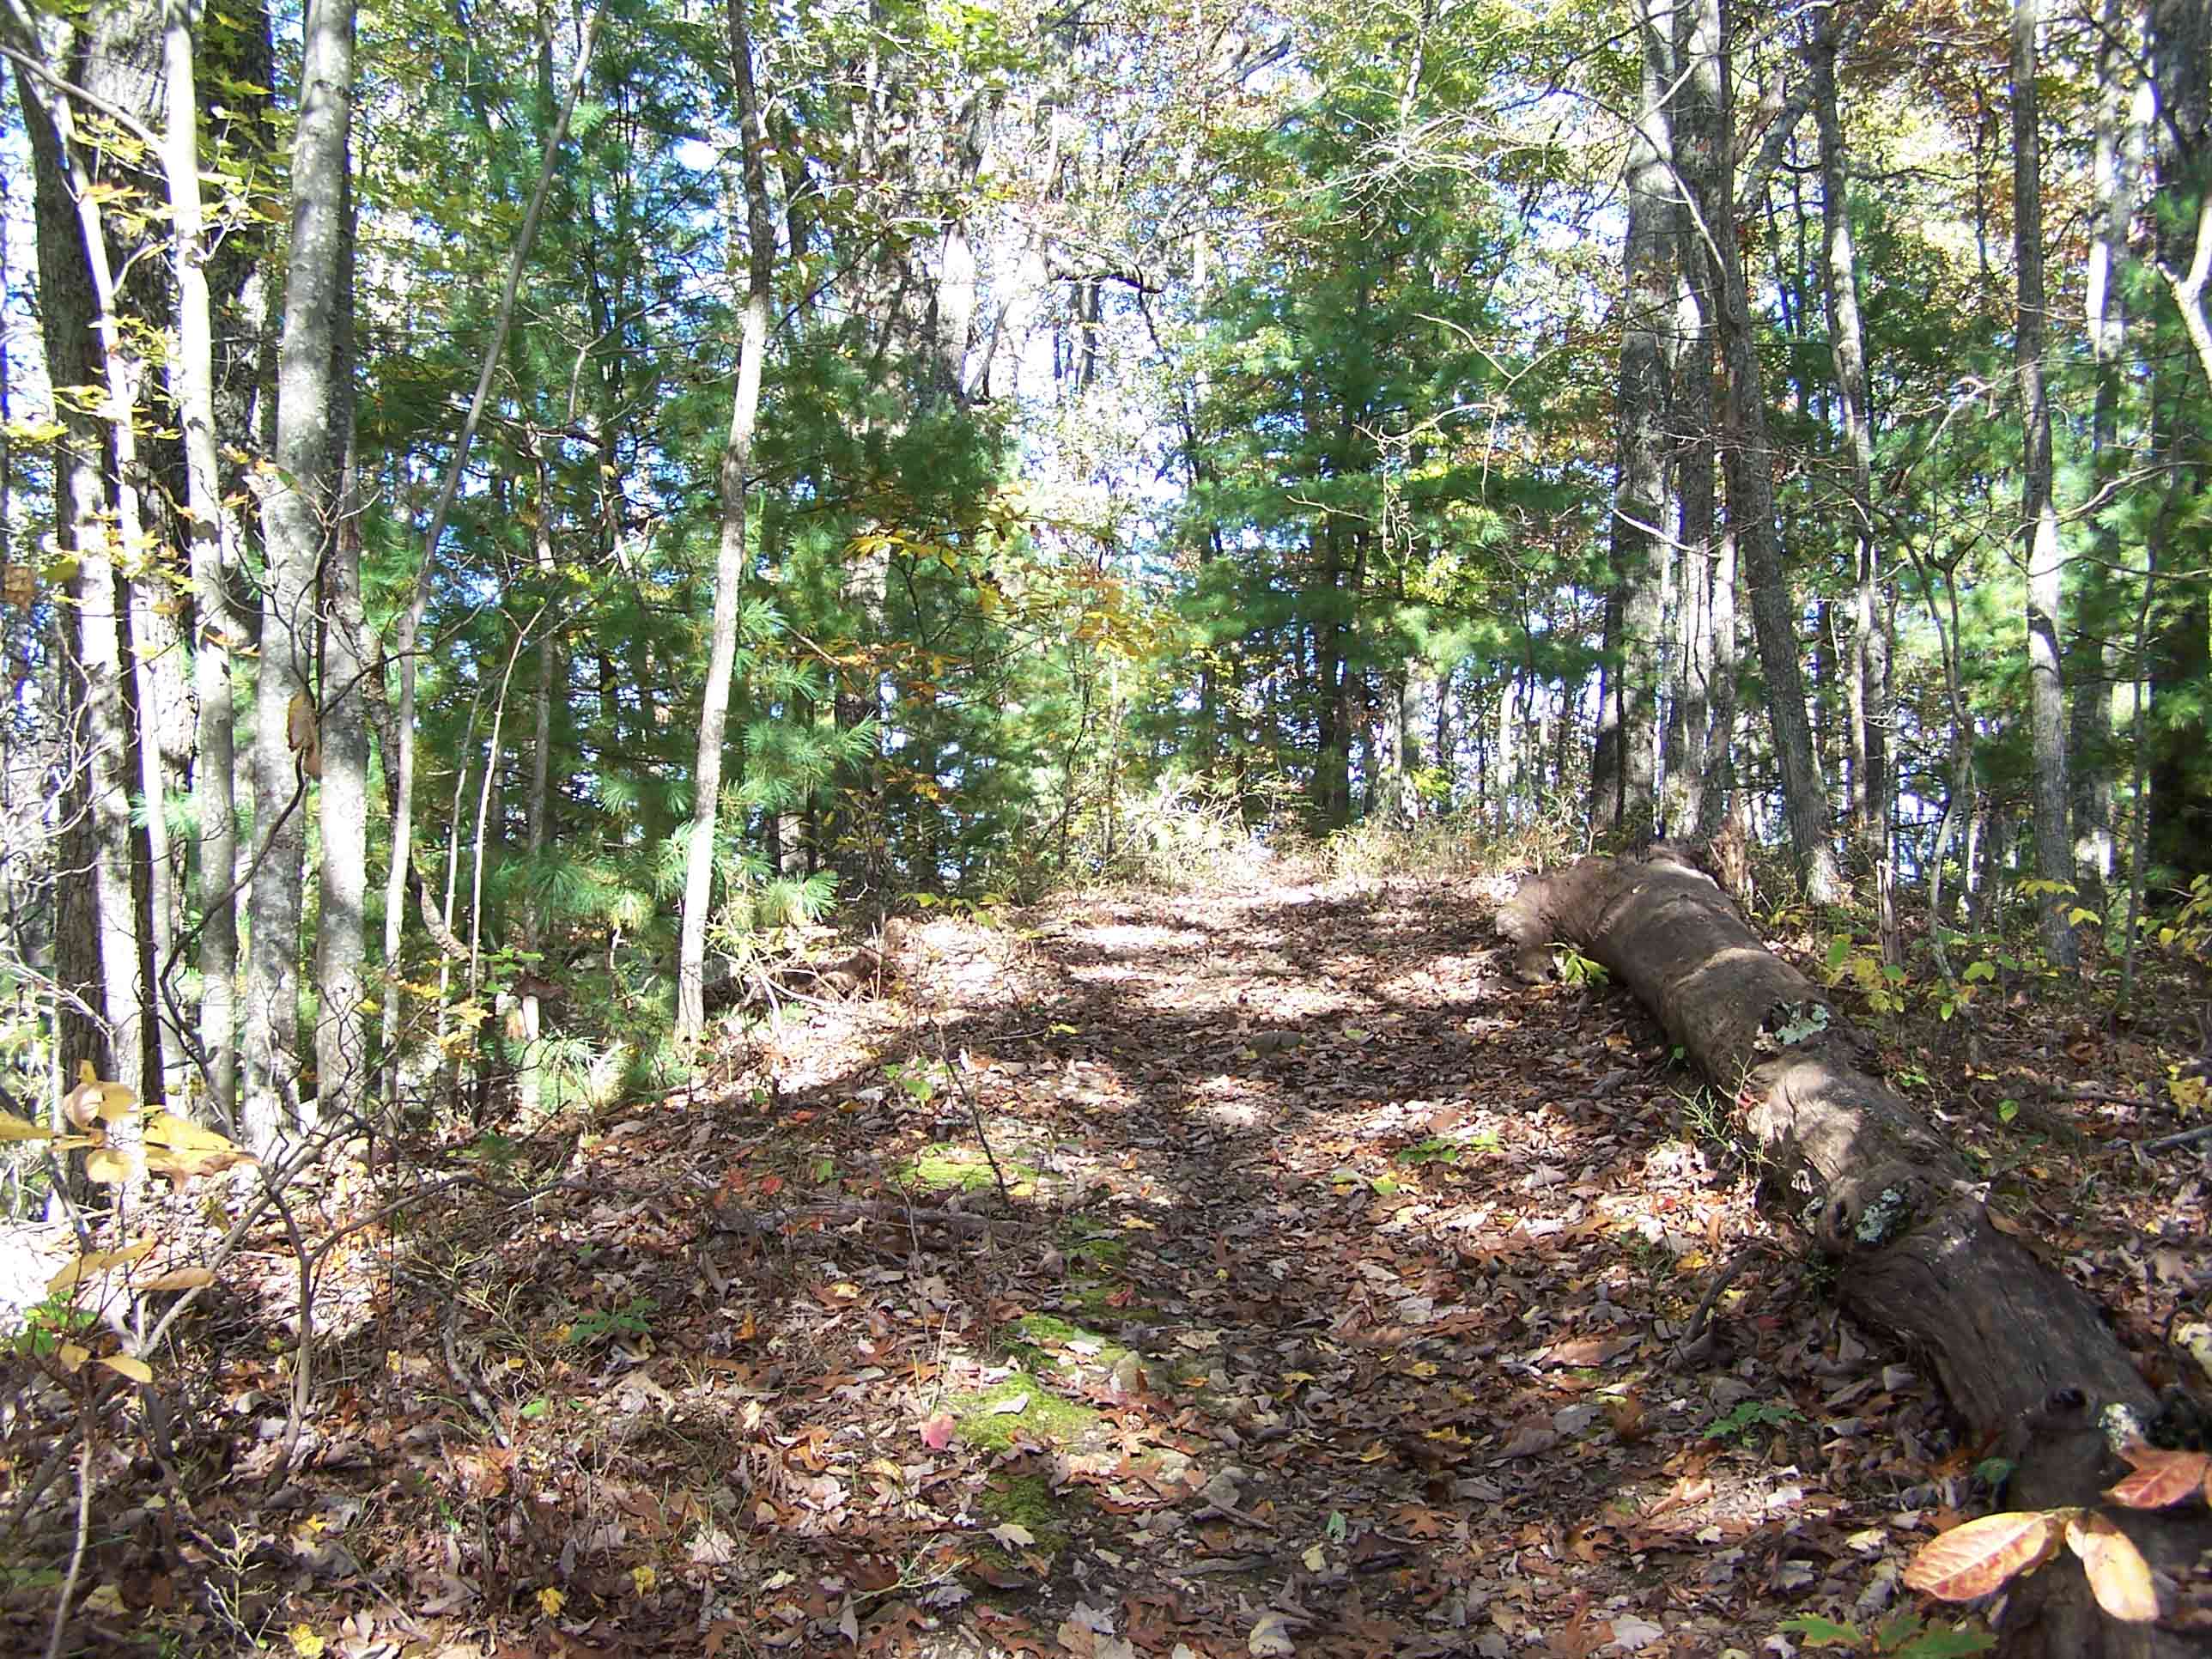 mm 12.3 - South end of trail along Lovers Leap Ridge. Courtesy at@rohland.org